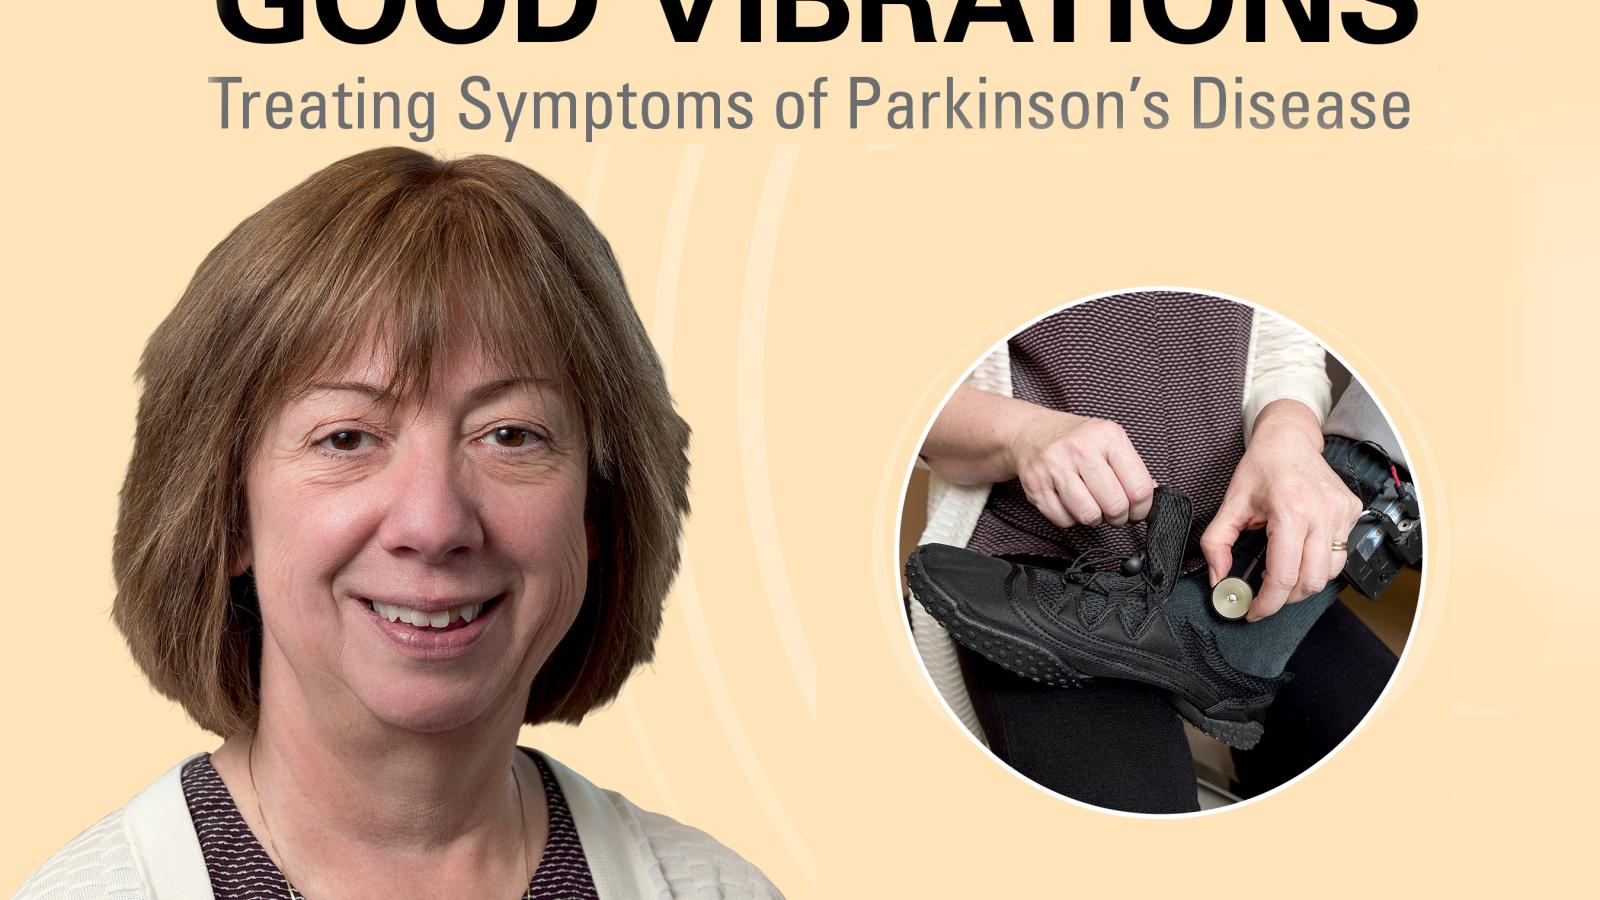 In a lab at the VCU School of Nursing, Ingrid Pretzer-Aboff, Ph.D., RN, studies a vibrating device worn inside the shoe that could significantly reduce or put an end to a symptom of Parkinson’s disease known as freezing of gait. Dr. Pretzer-Aboff’s research is supported by The Michael J. Fox Foundation. Photos: Kevin Schindler